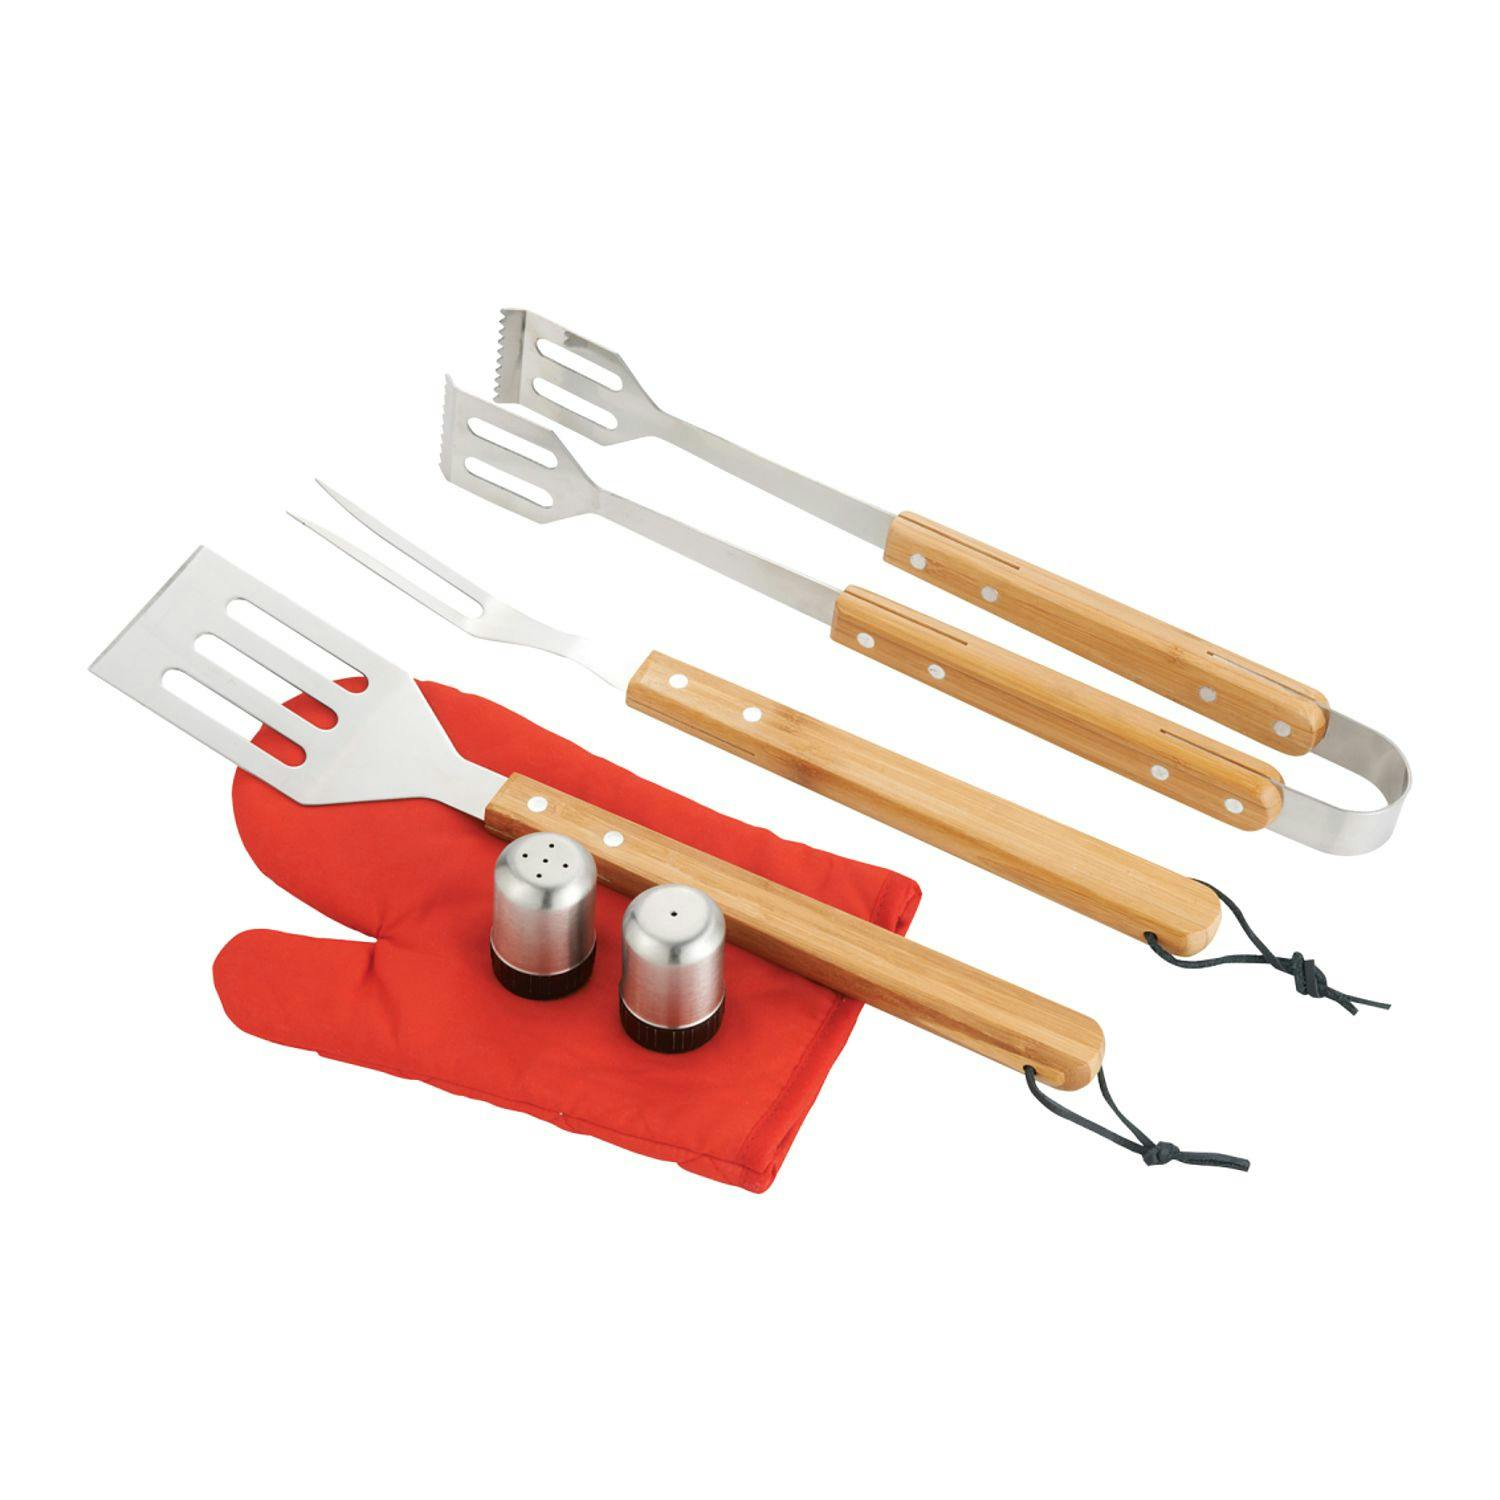 BBQ Now Apron and 7 piece BBQ Set - additional Image 1